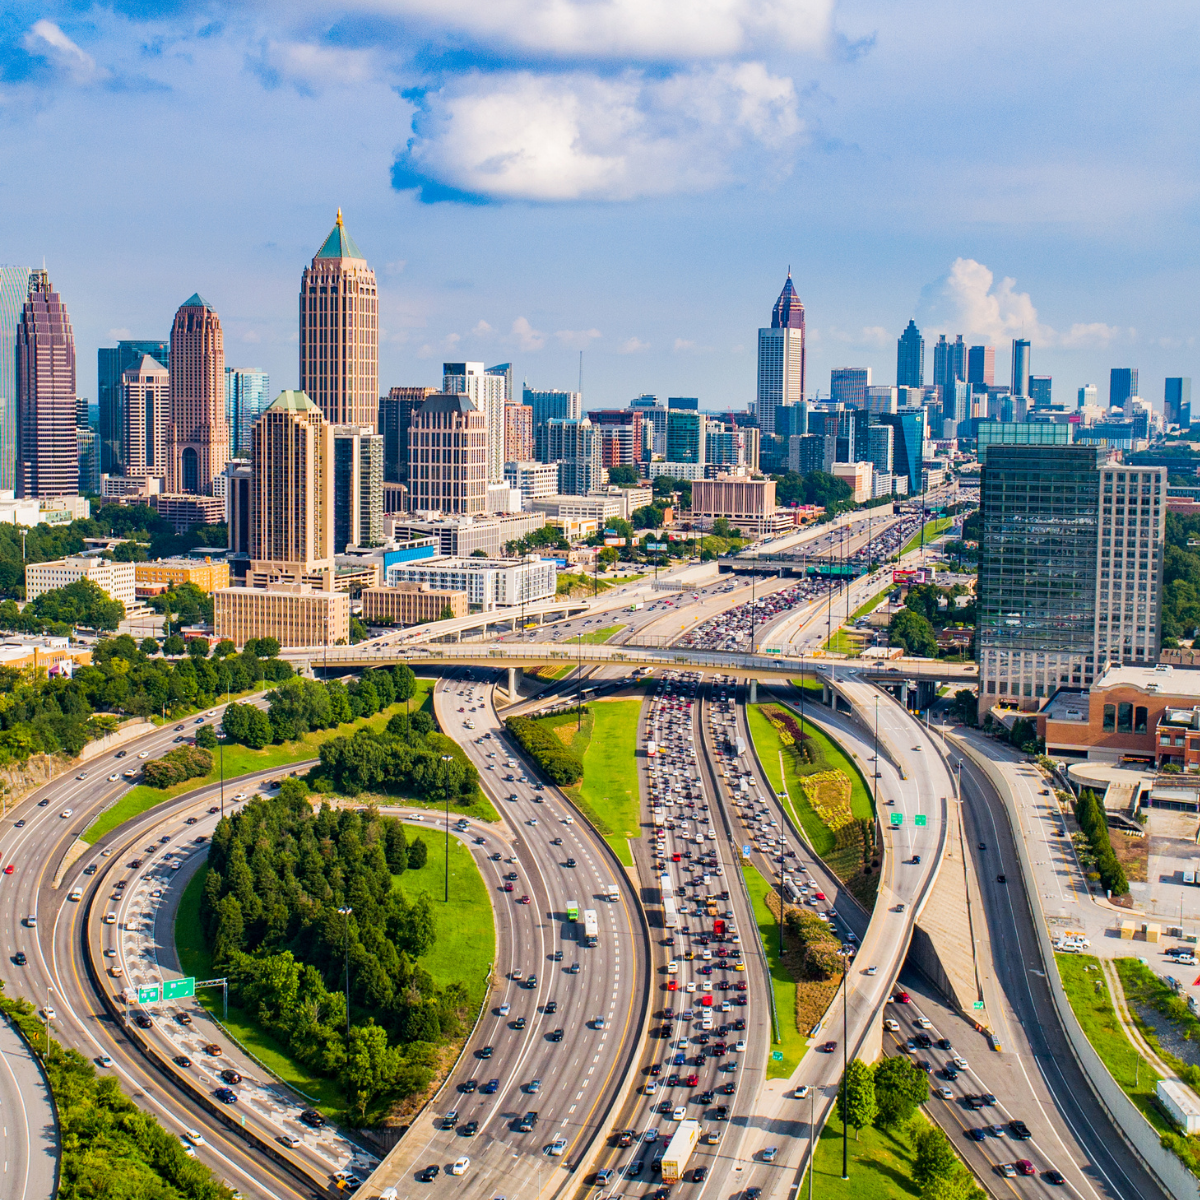 Recognizing Atlanta as a gateway to the world.